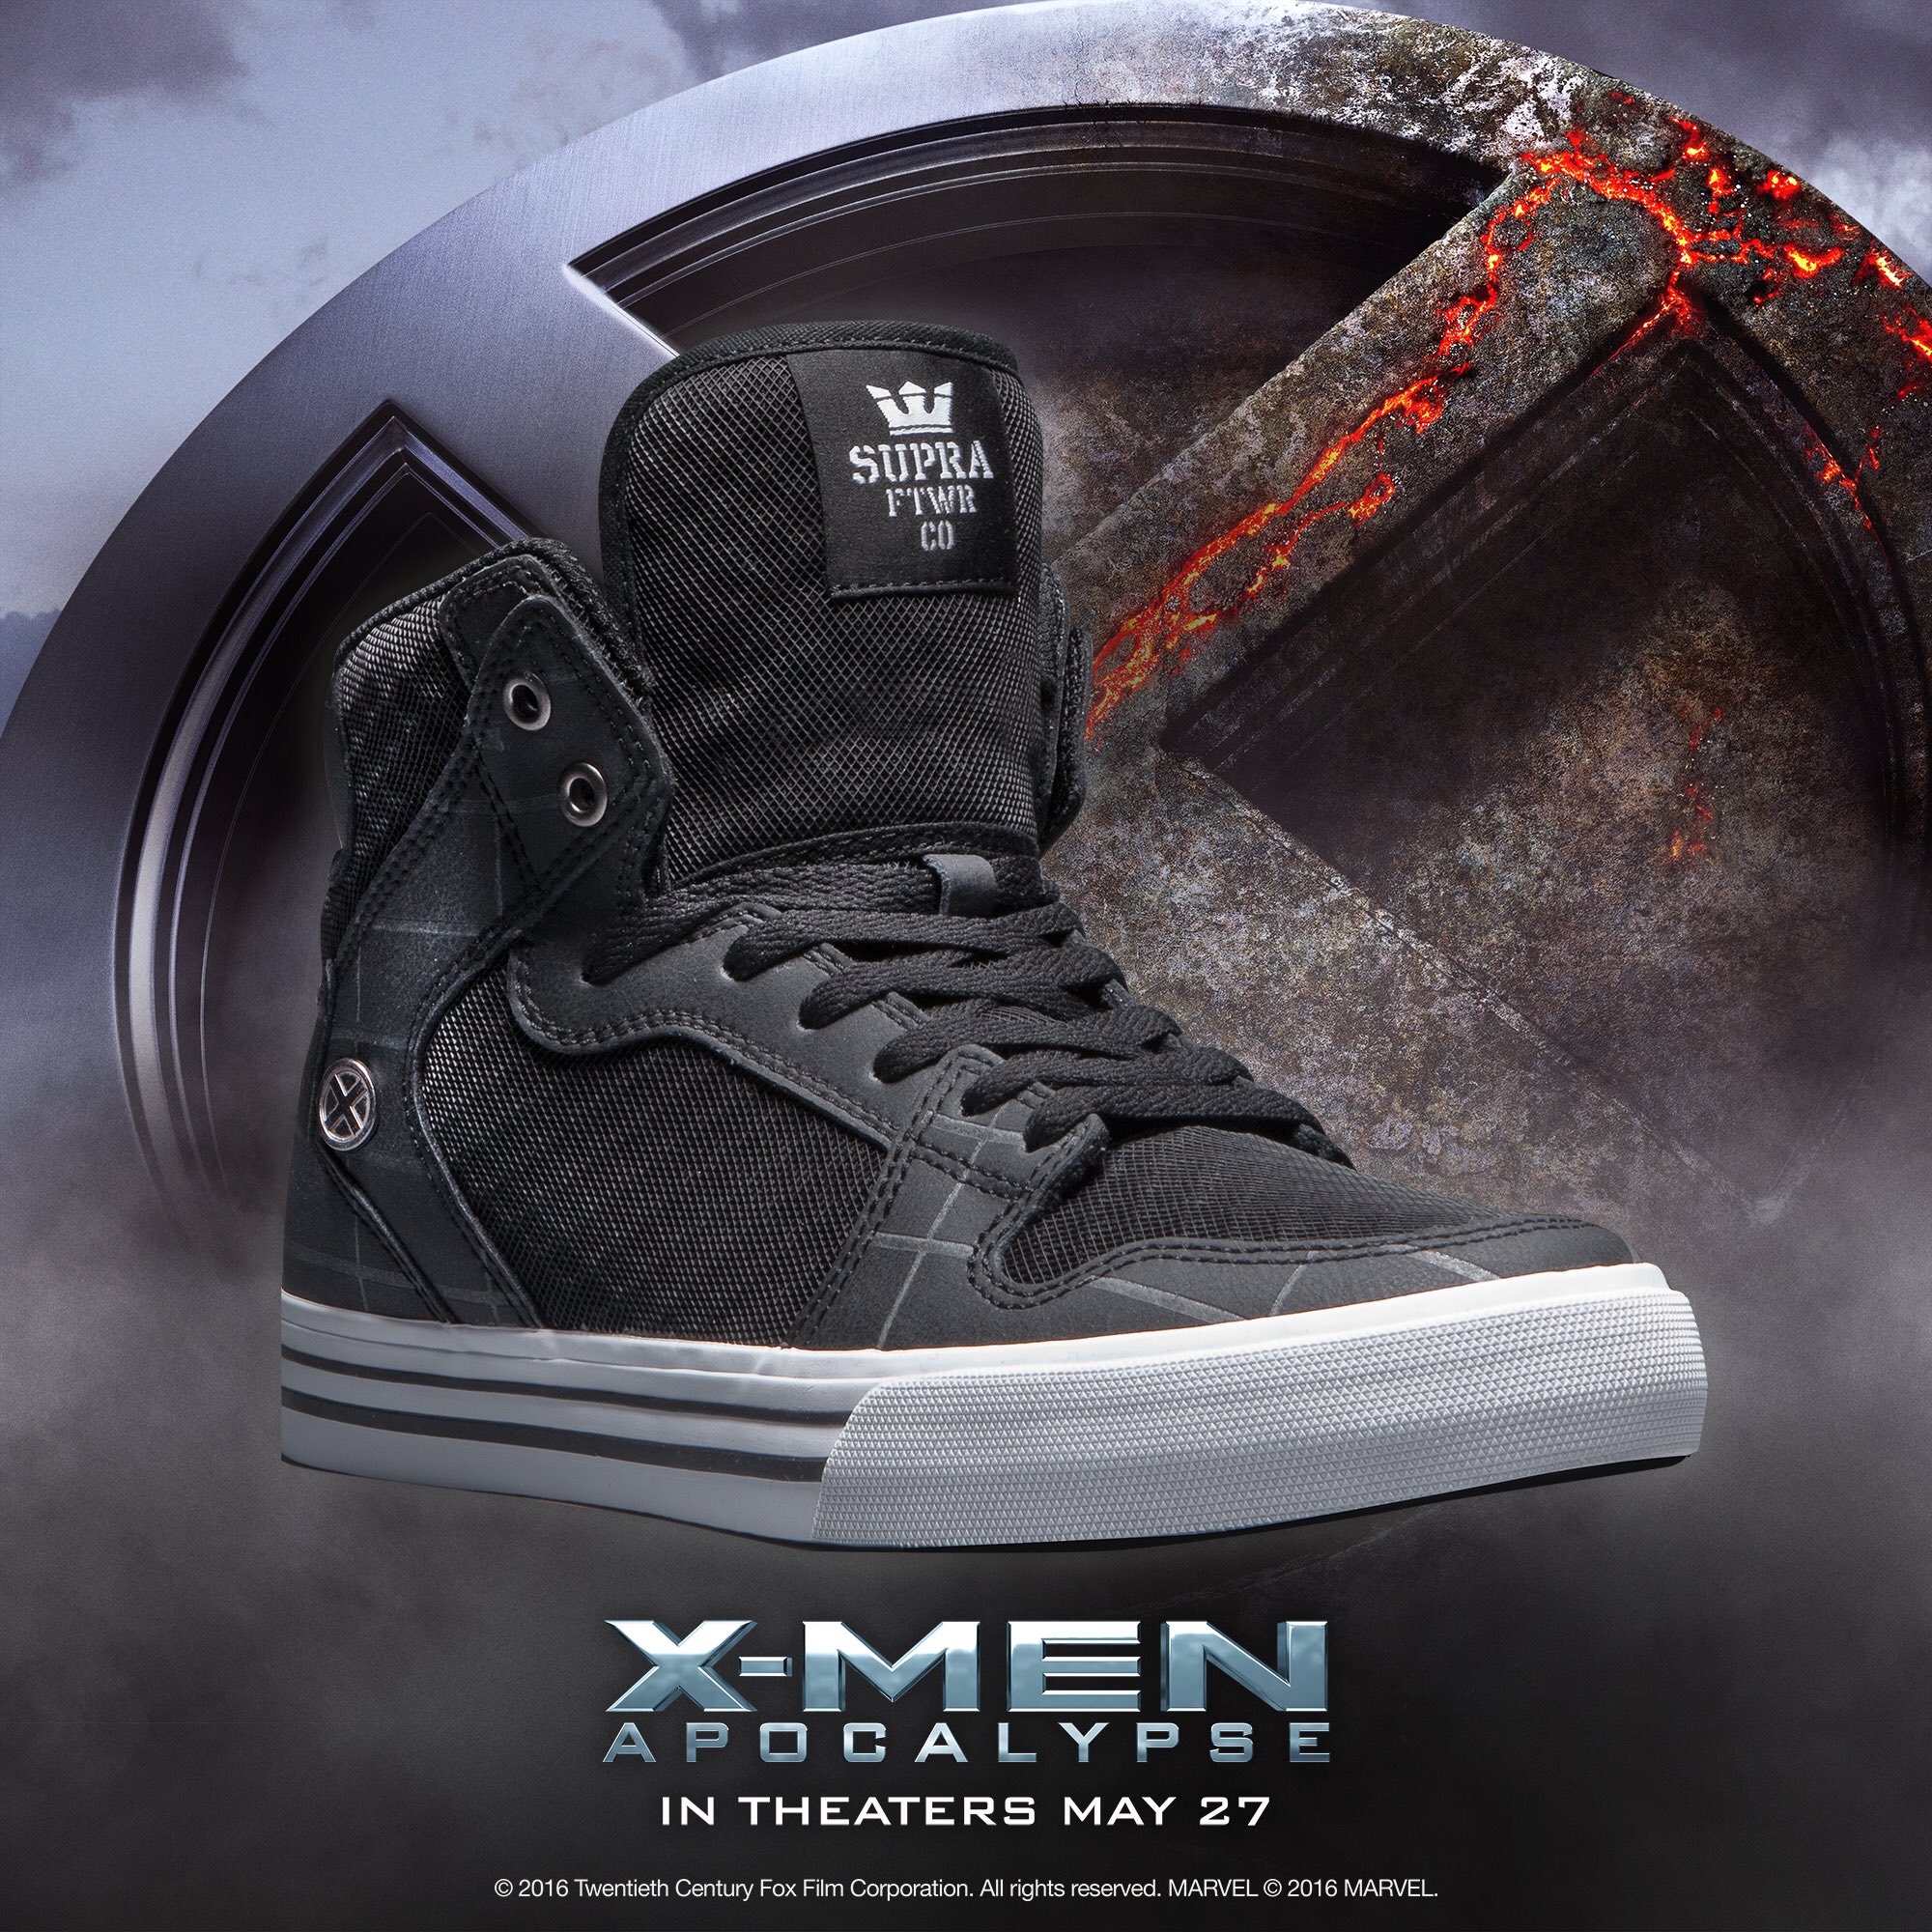 Madeliefje bevroren Initiatief SUPRA Footwear on Twitter: "Our limited edition Vaider inspired by the  heroes of the upcoming #Xmen #Apocalypse film! → https://t.co/41Ez7qdq7A  https://t.co/5Hm9Cm2aCX" / Twitter